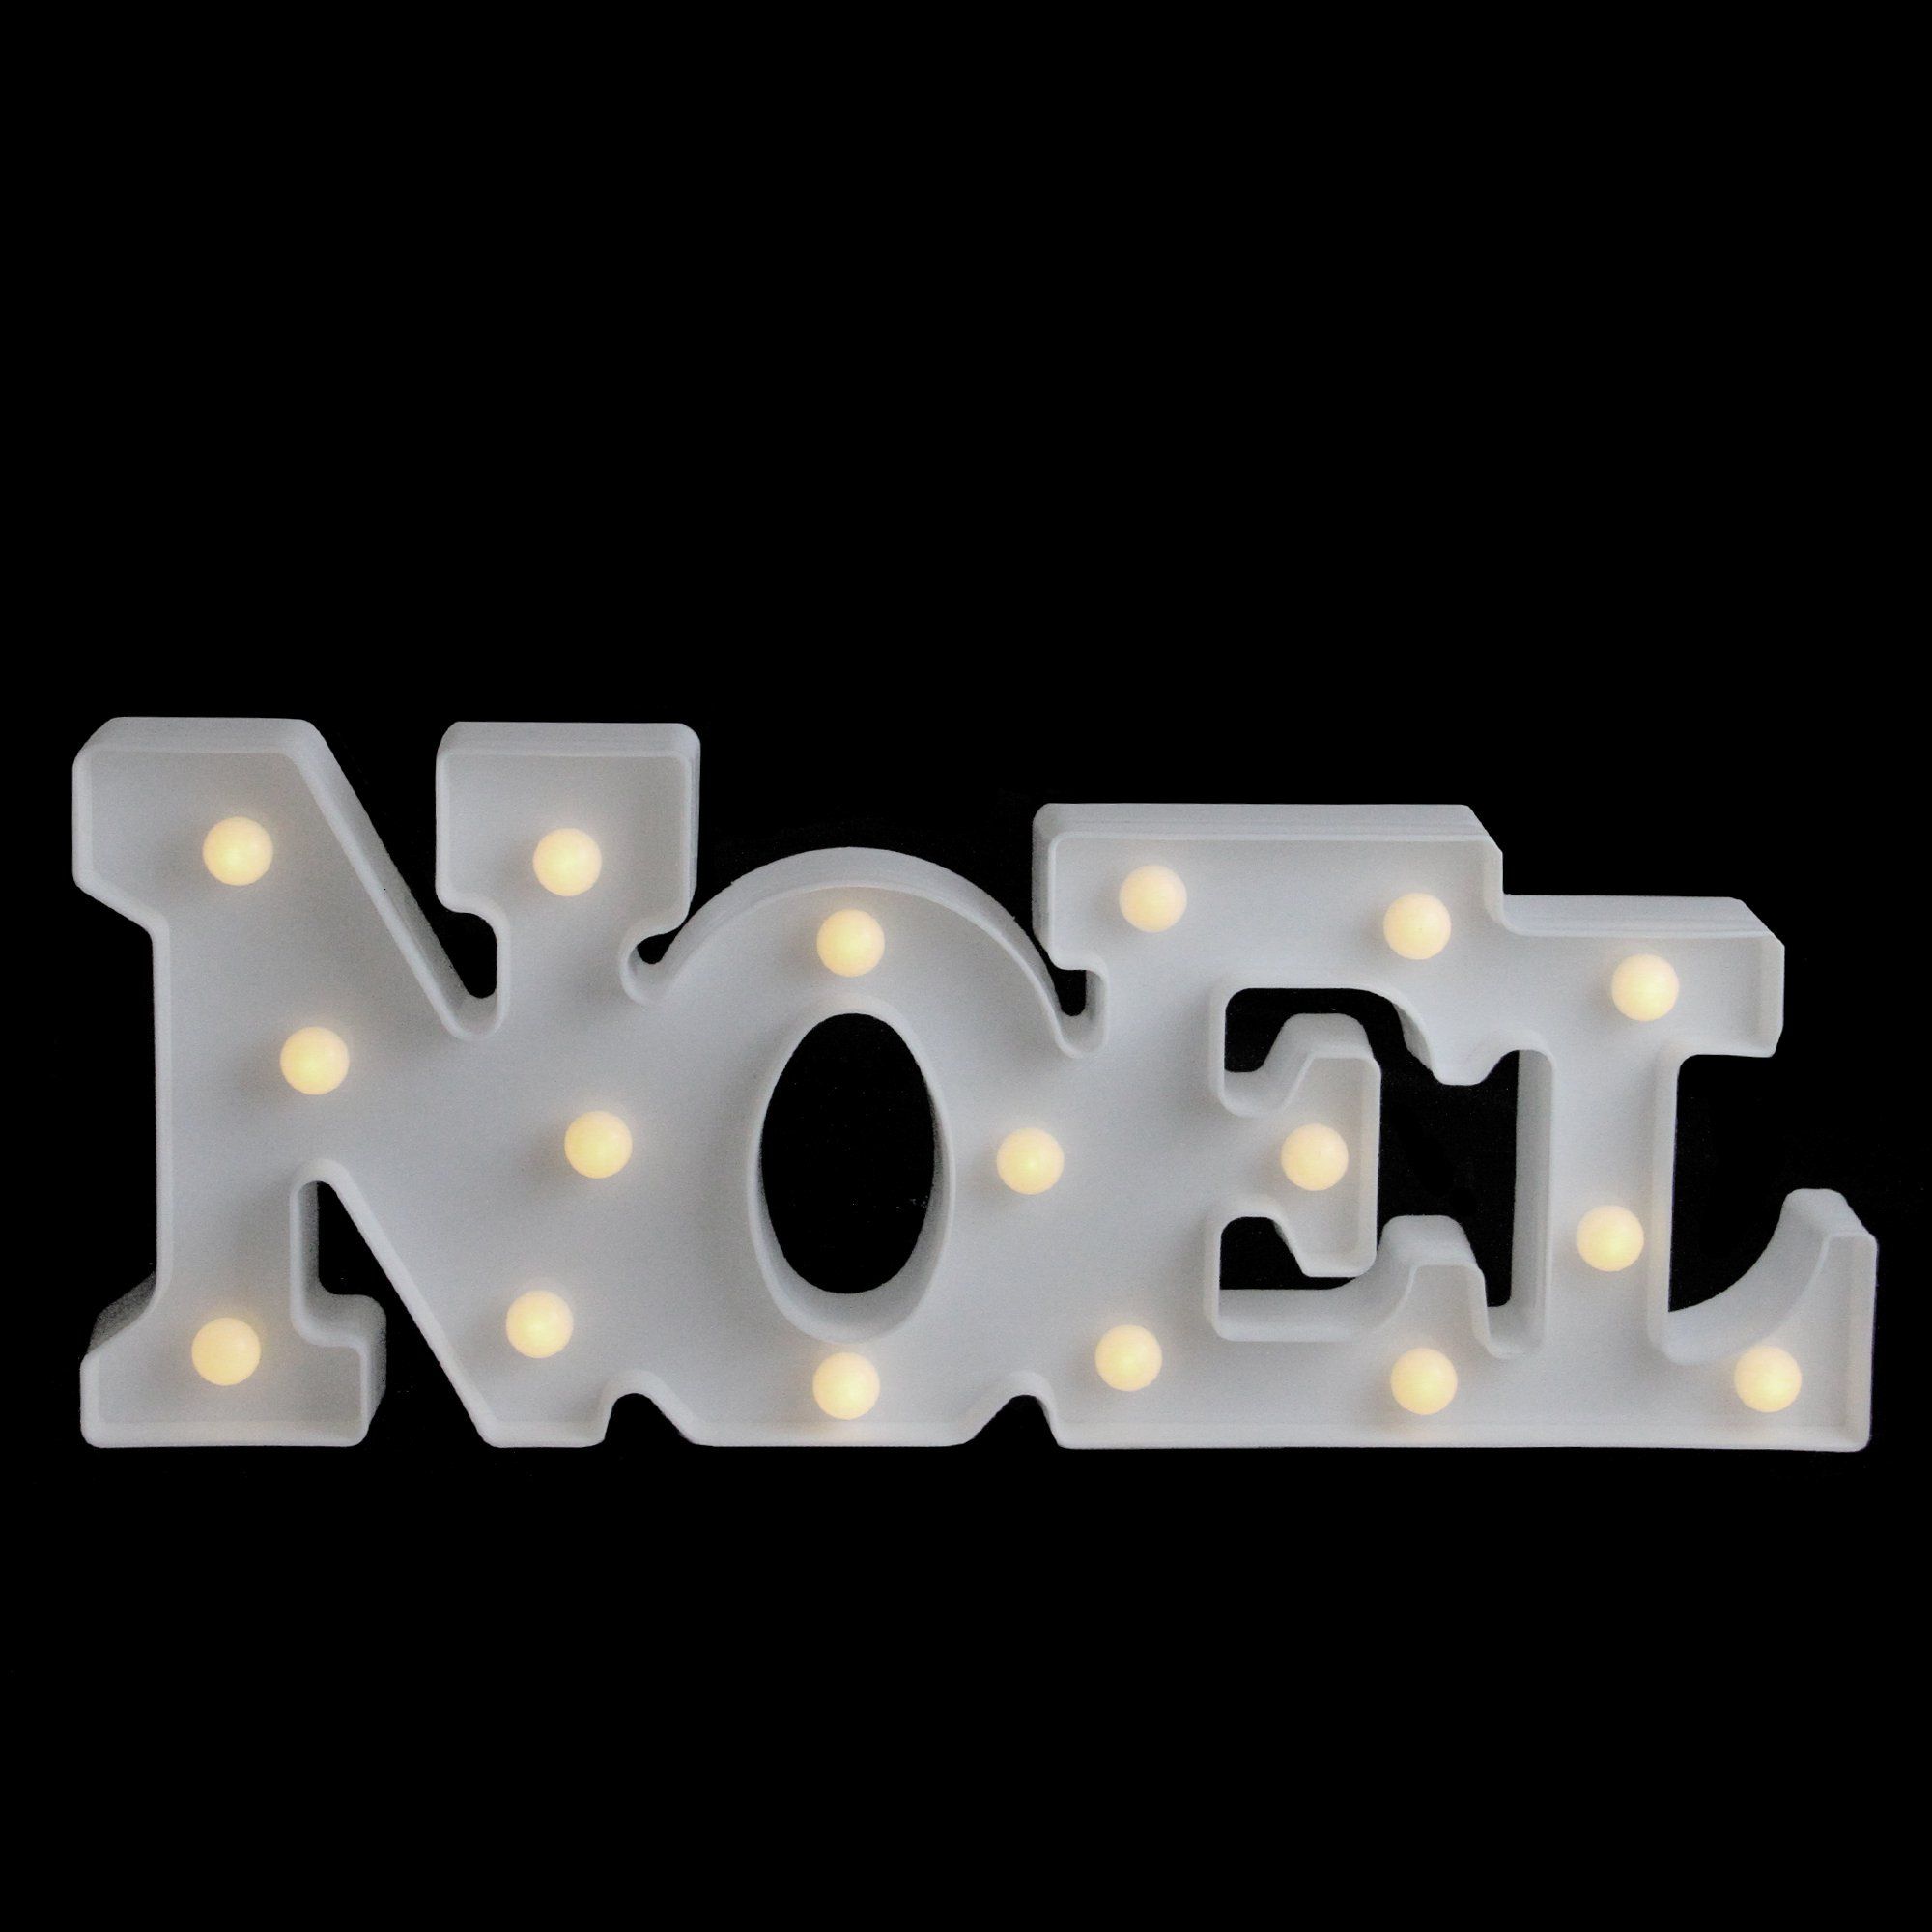 Northlight 17" Battery Operated LED Lighted "NOEL" Christmas Marquee Sign - Warm White | Walmart (US)